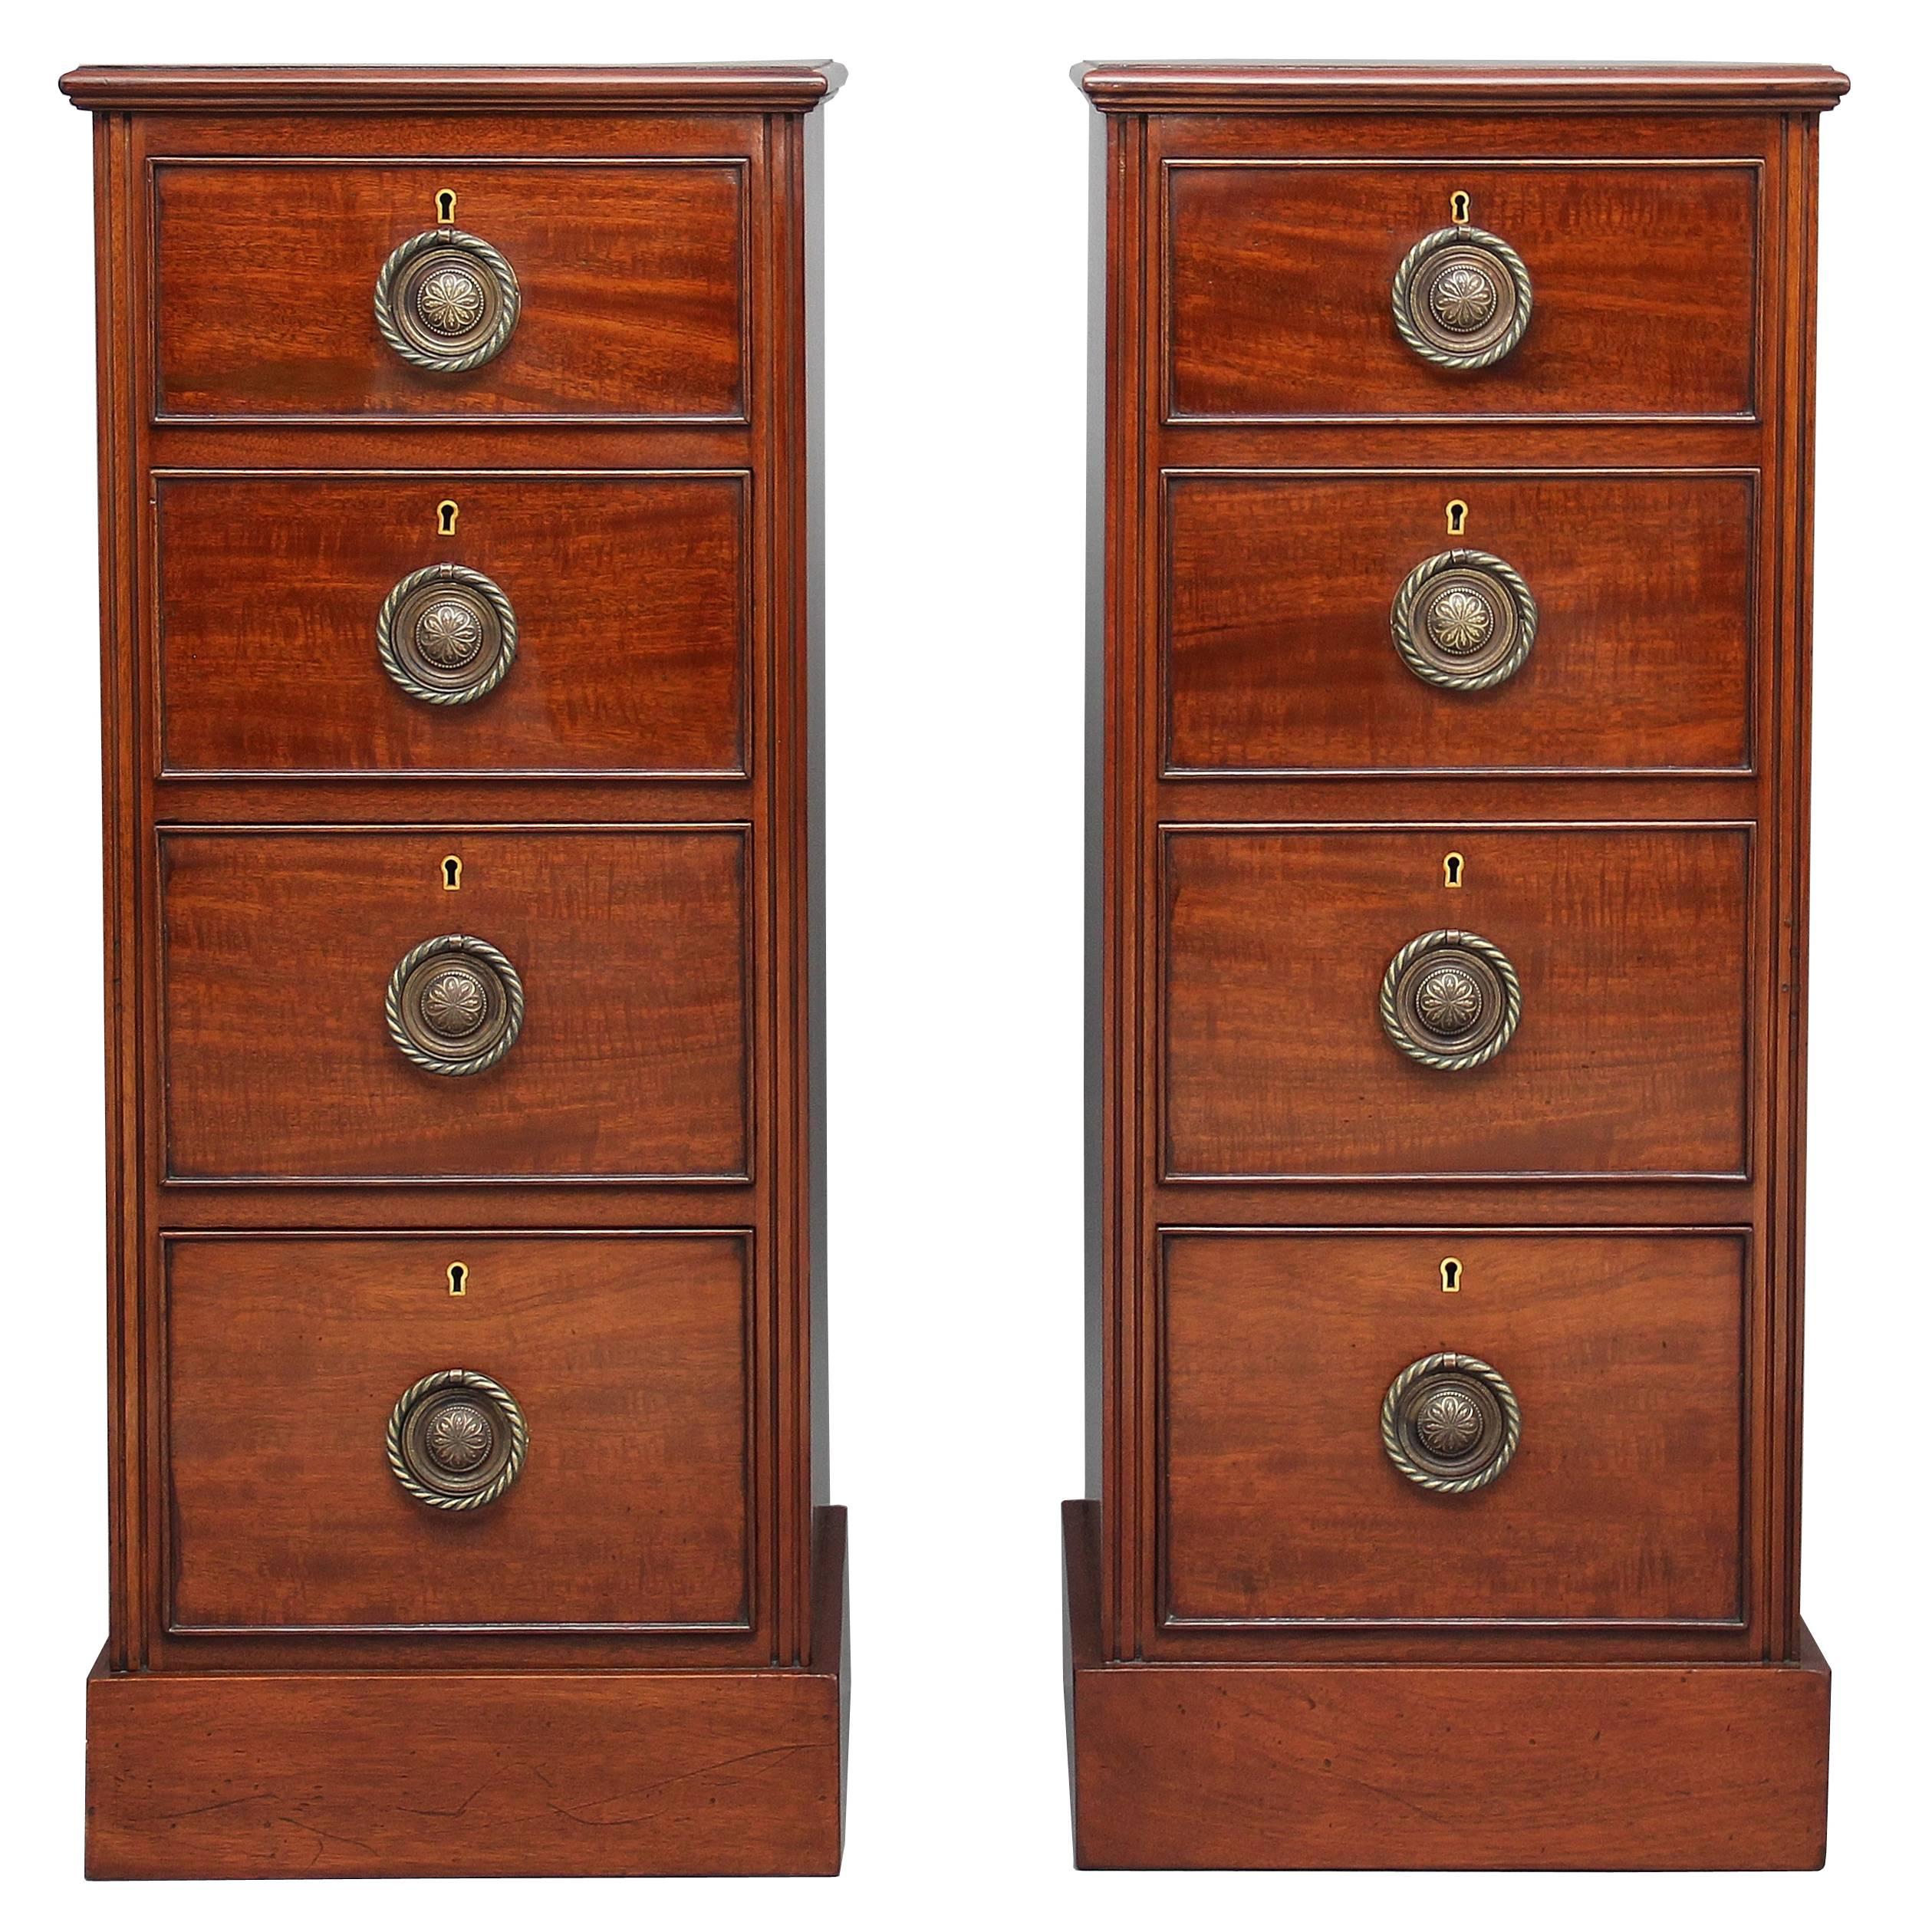 Pair of Early 20th Century Mahogany Bedside Chests Cabinets